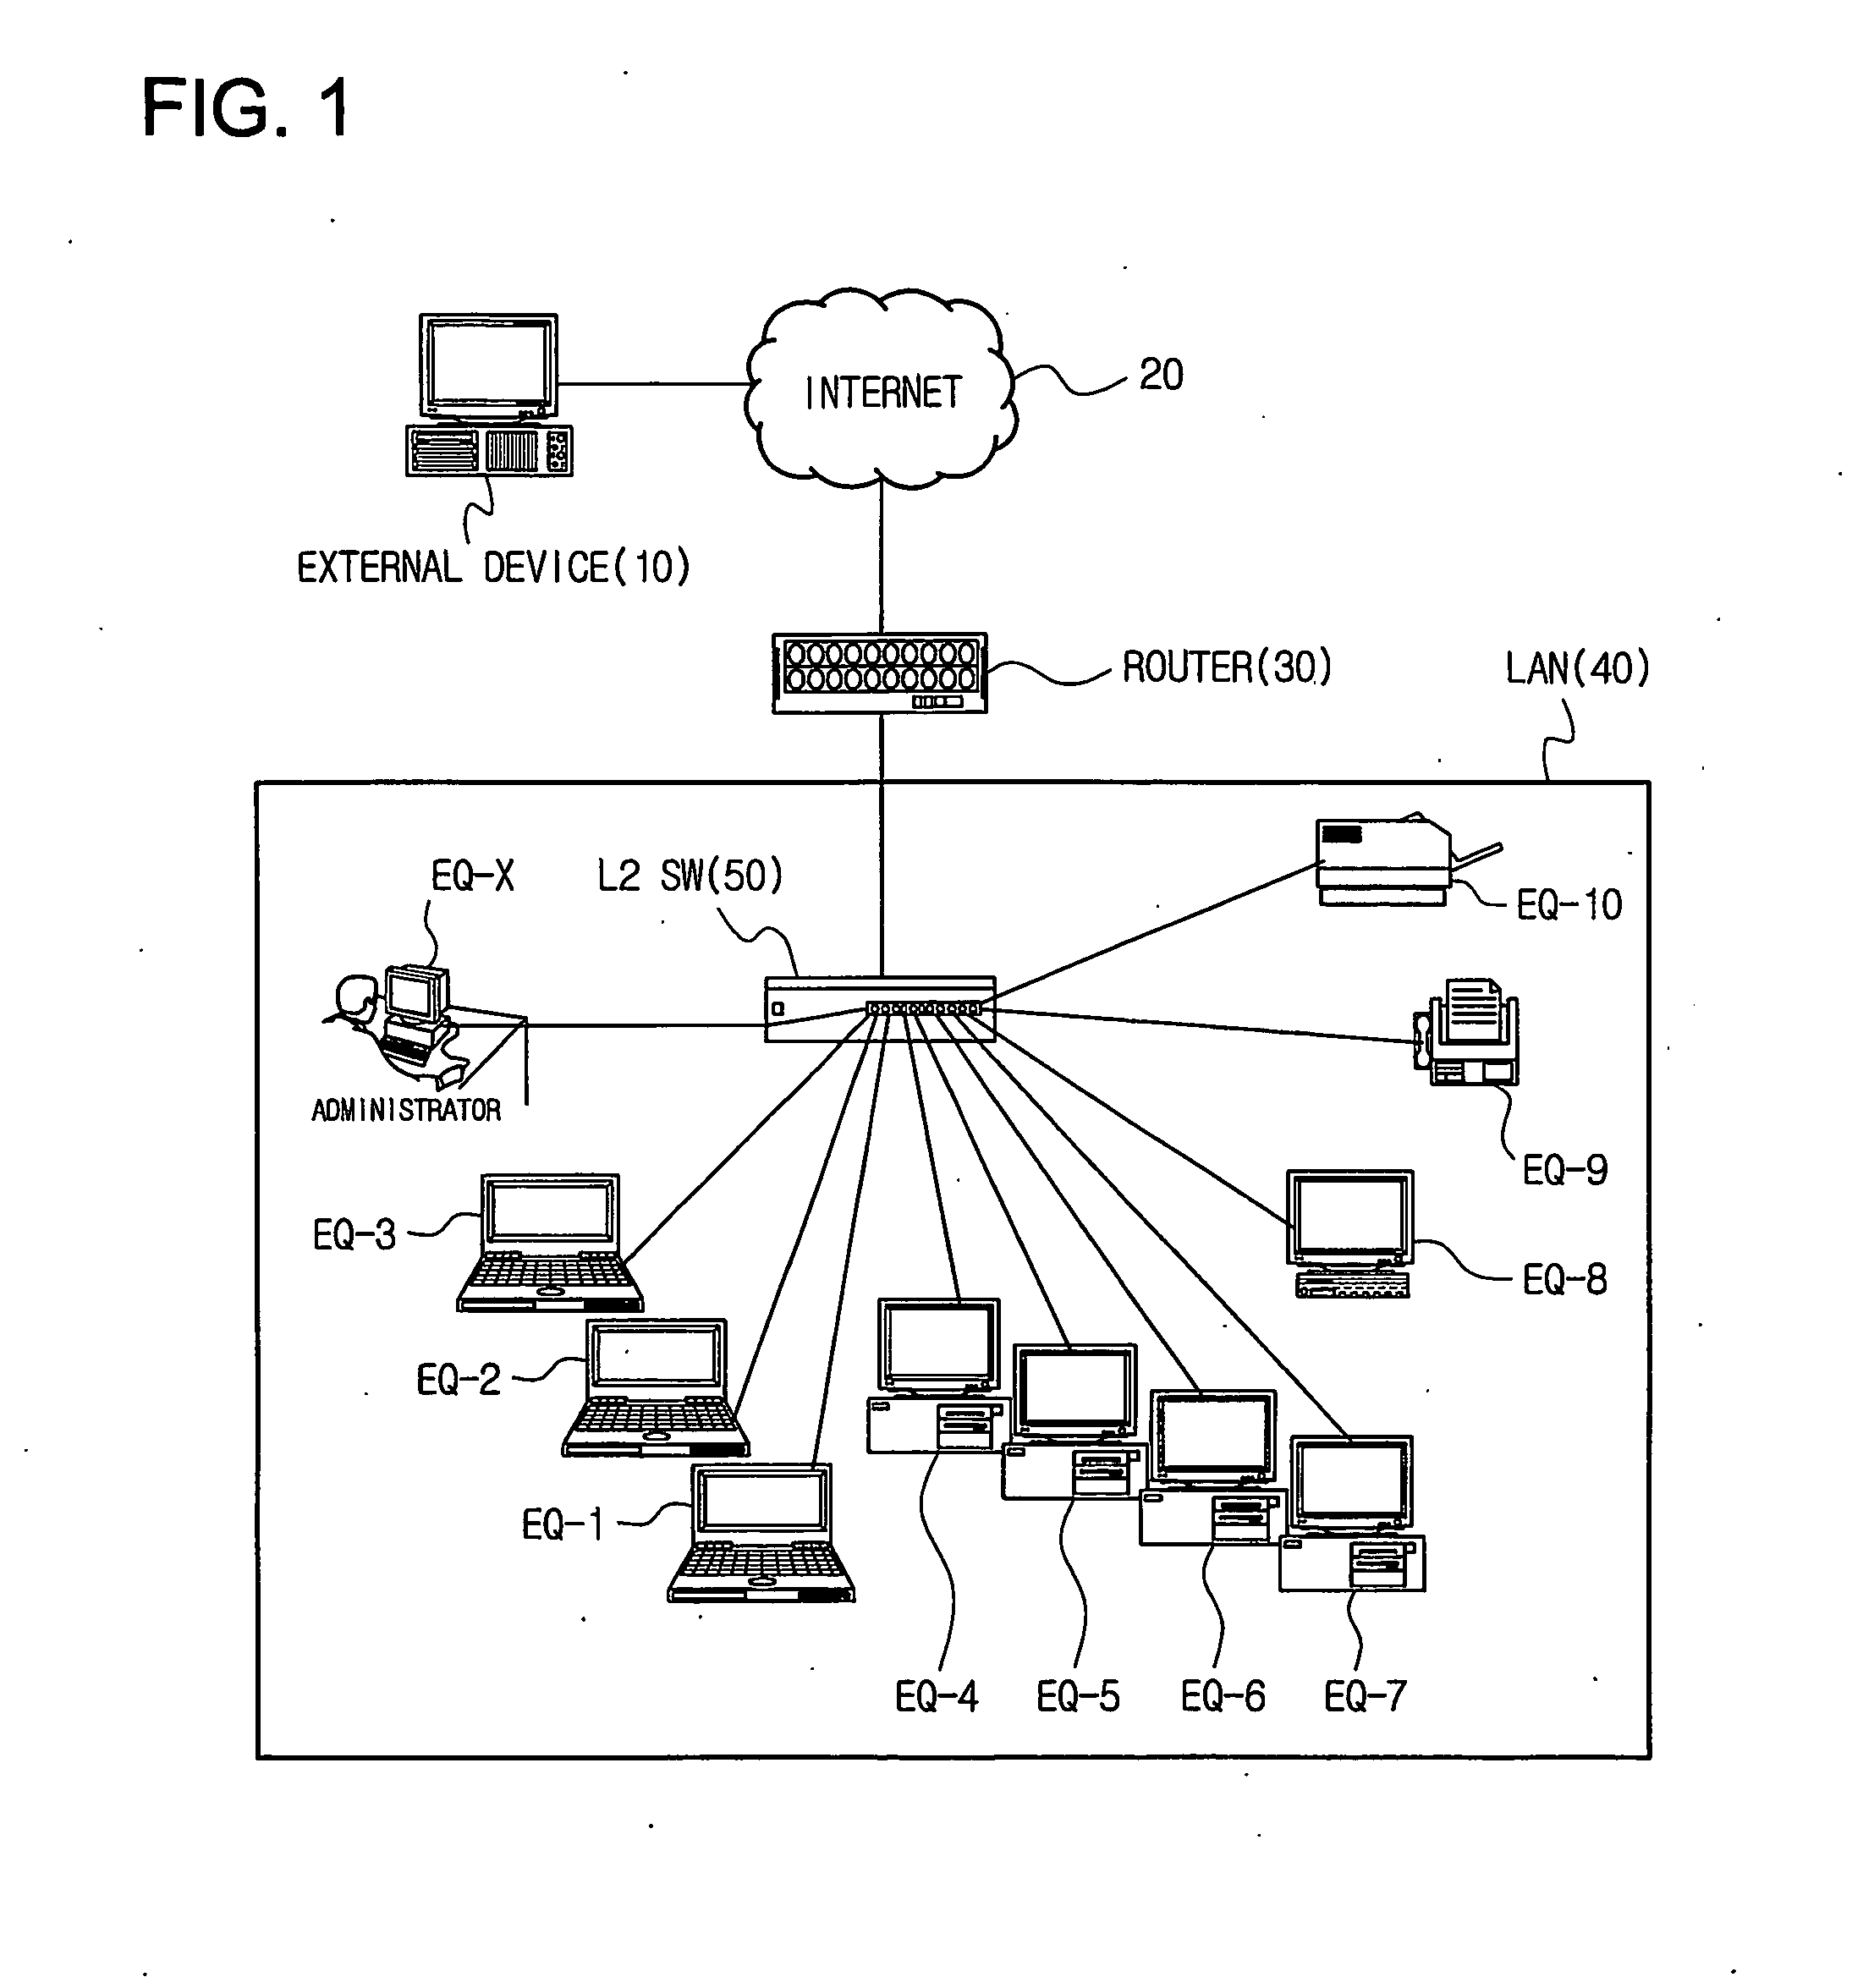 Method of controlling communication between devices in a network and apparatus for the same